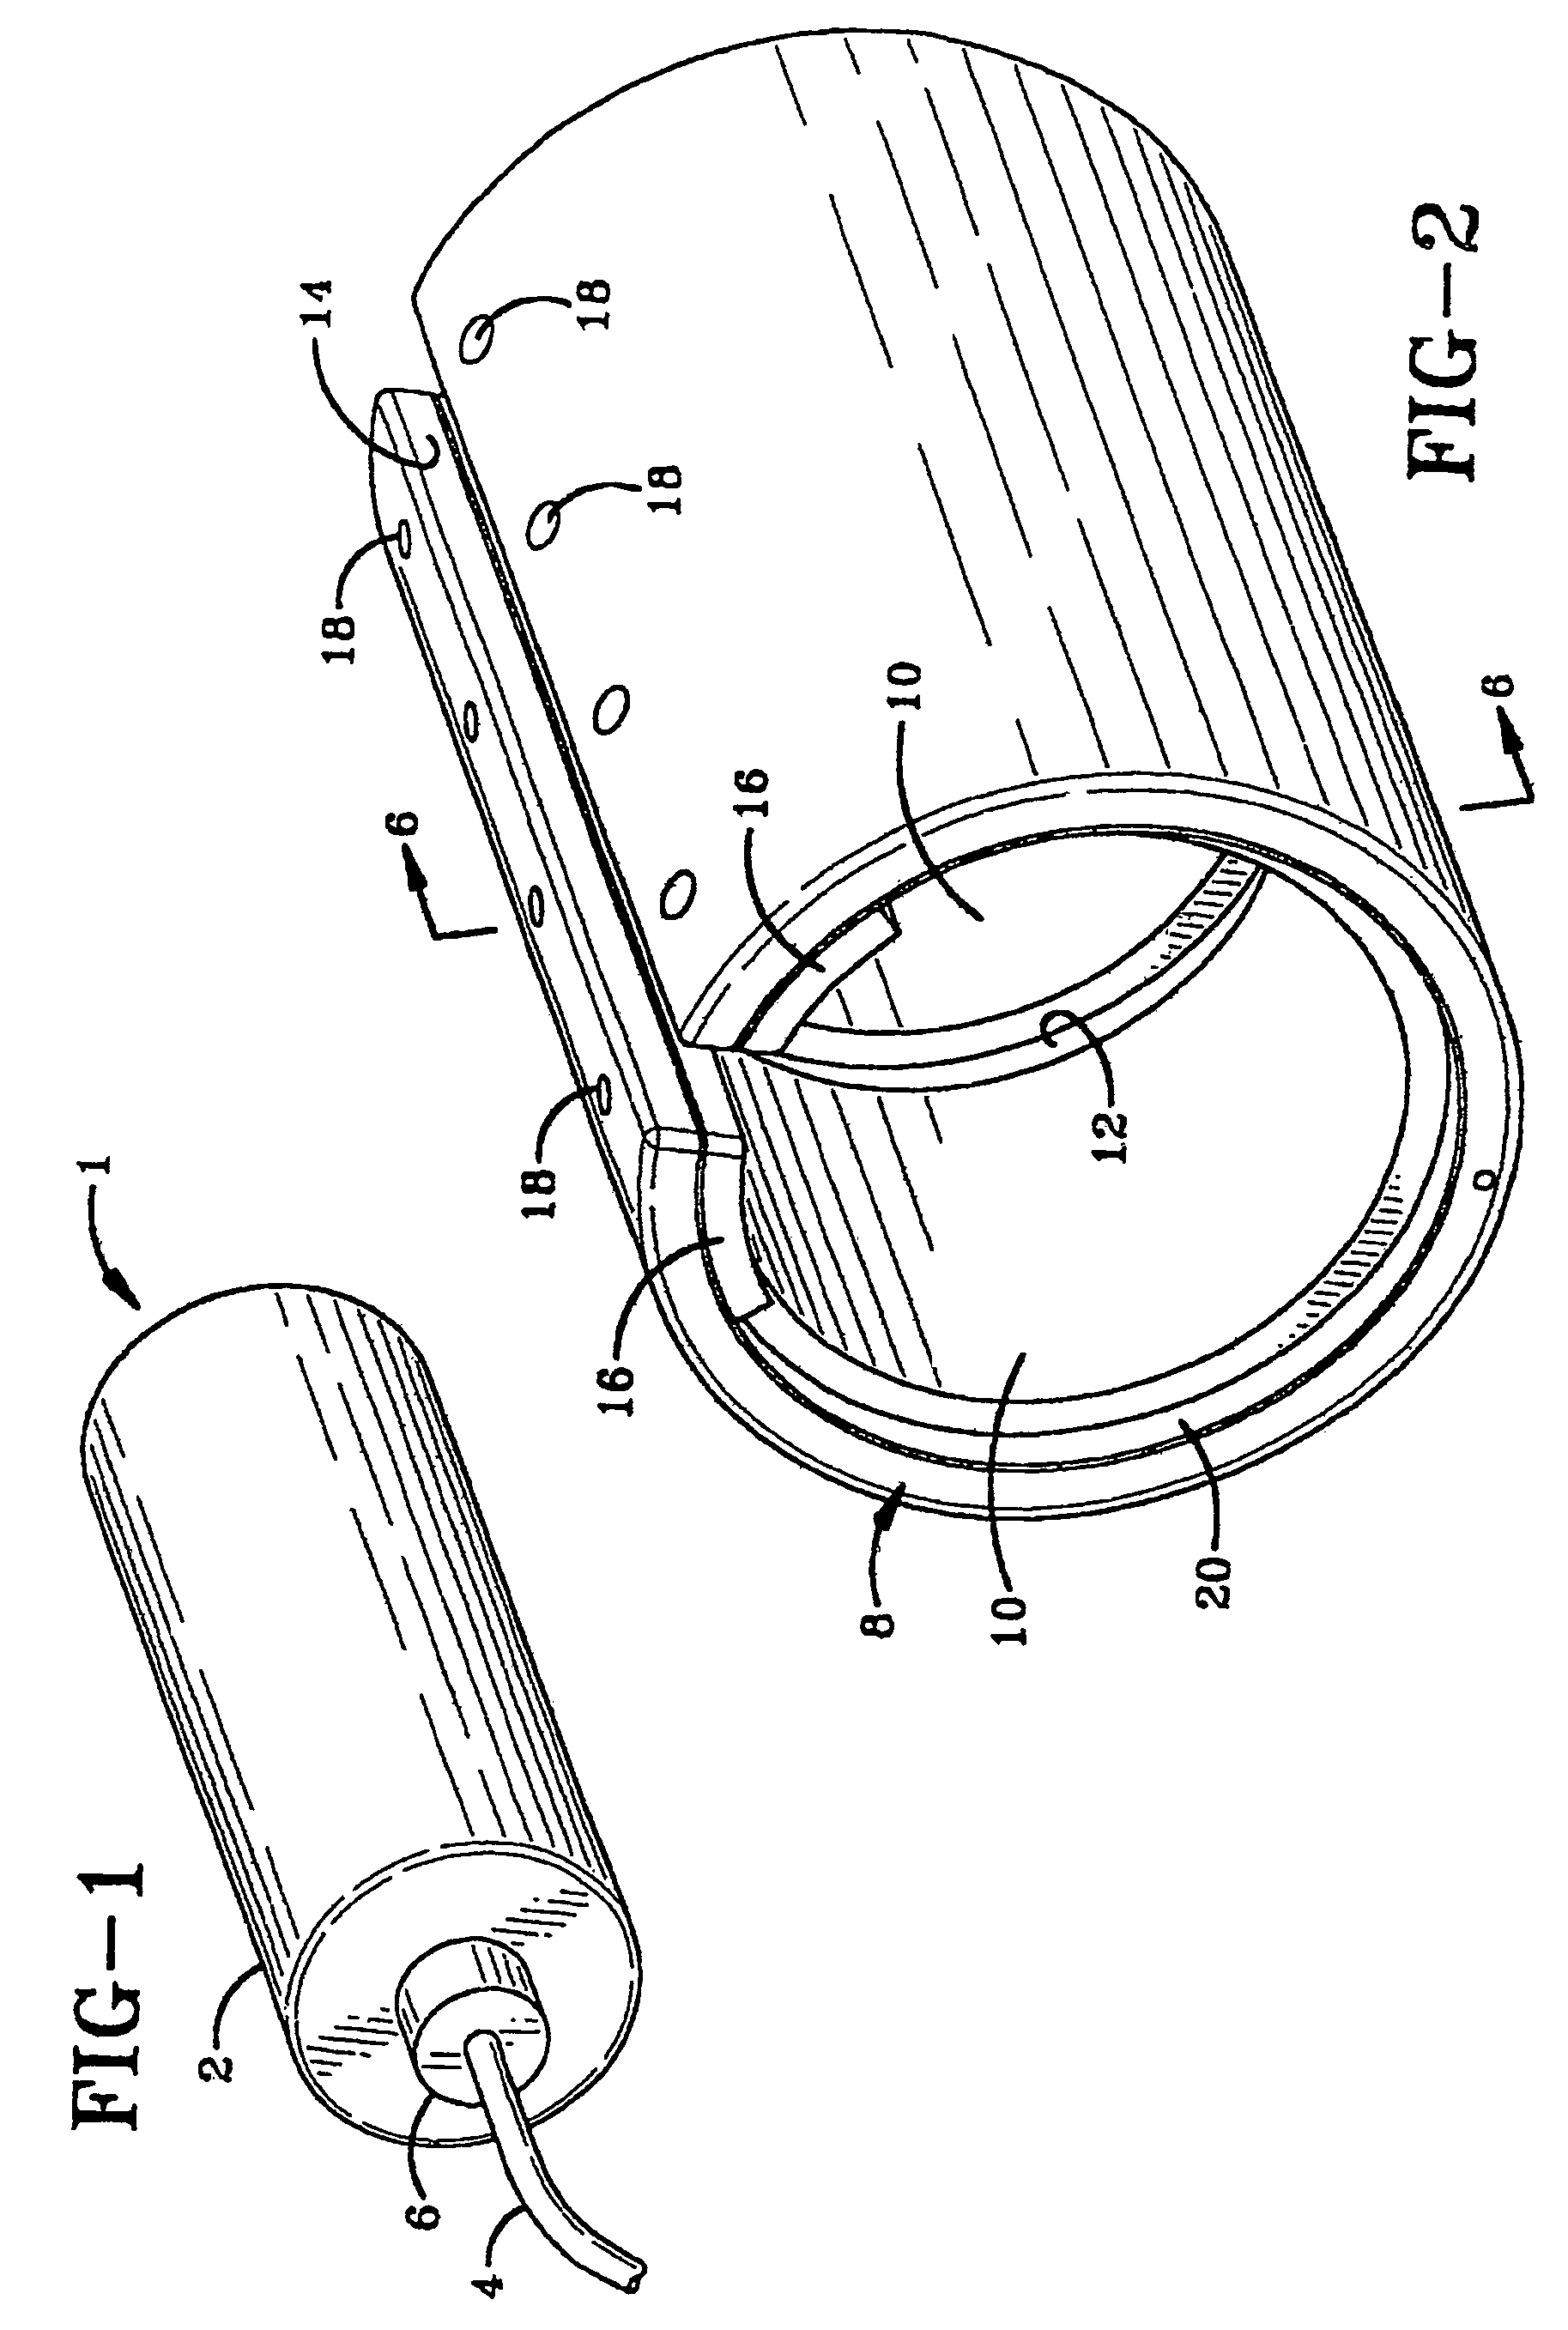 Acoustic projector and method of manufacture